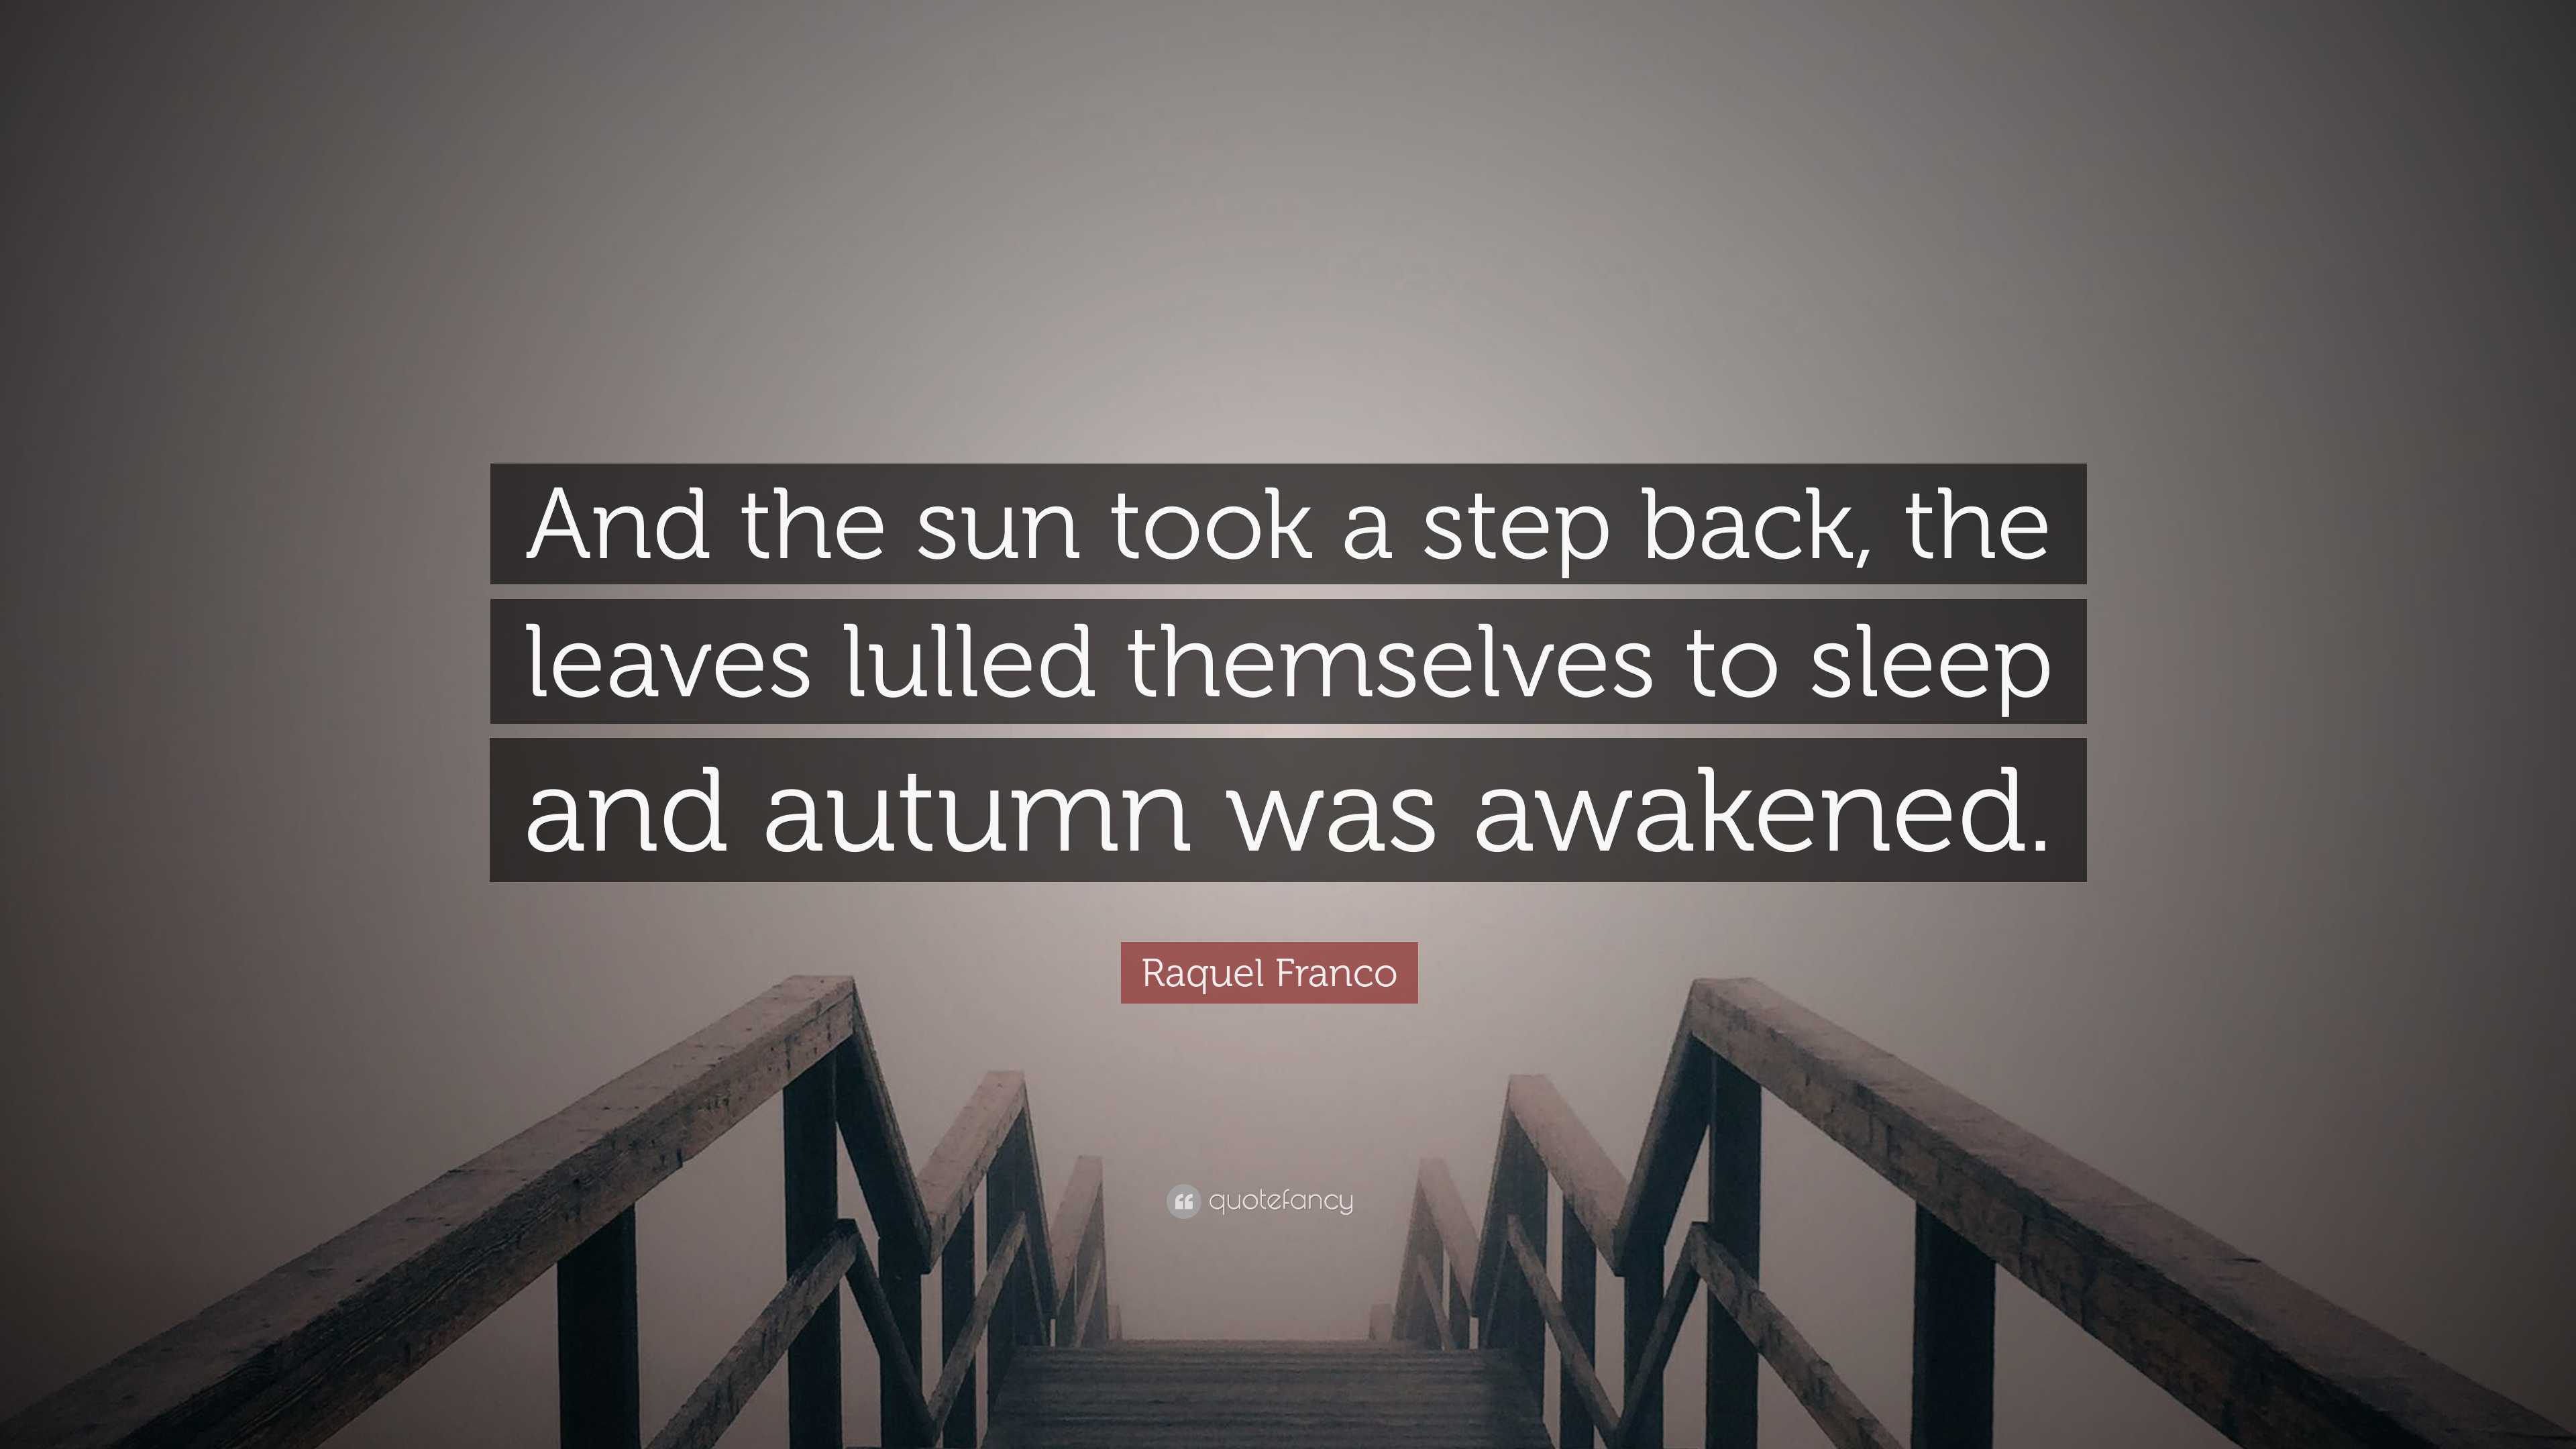 https://quotefancy.com/media/wallpaper/3840x2160/7918099-Raquel-Franco-Quote-And-the-sun-took-a-step-back-the-leaves-lulled.jpg